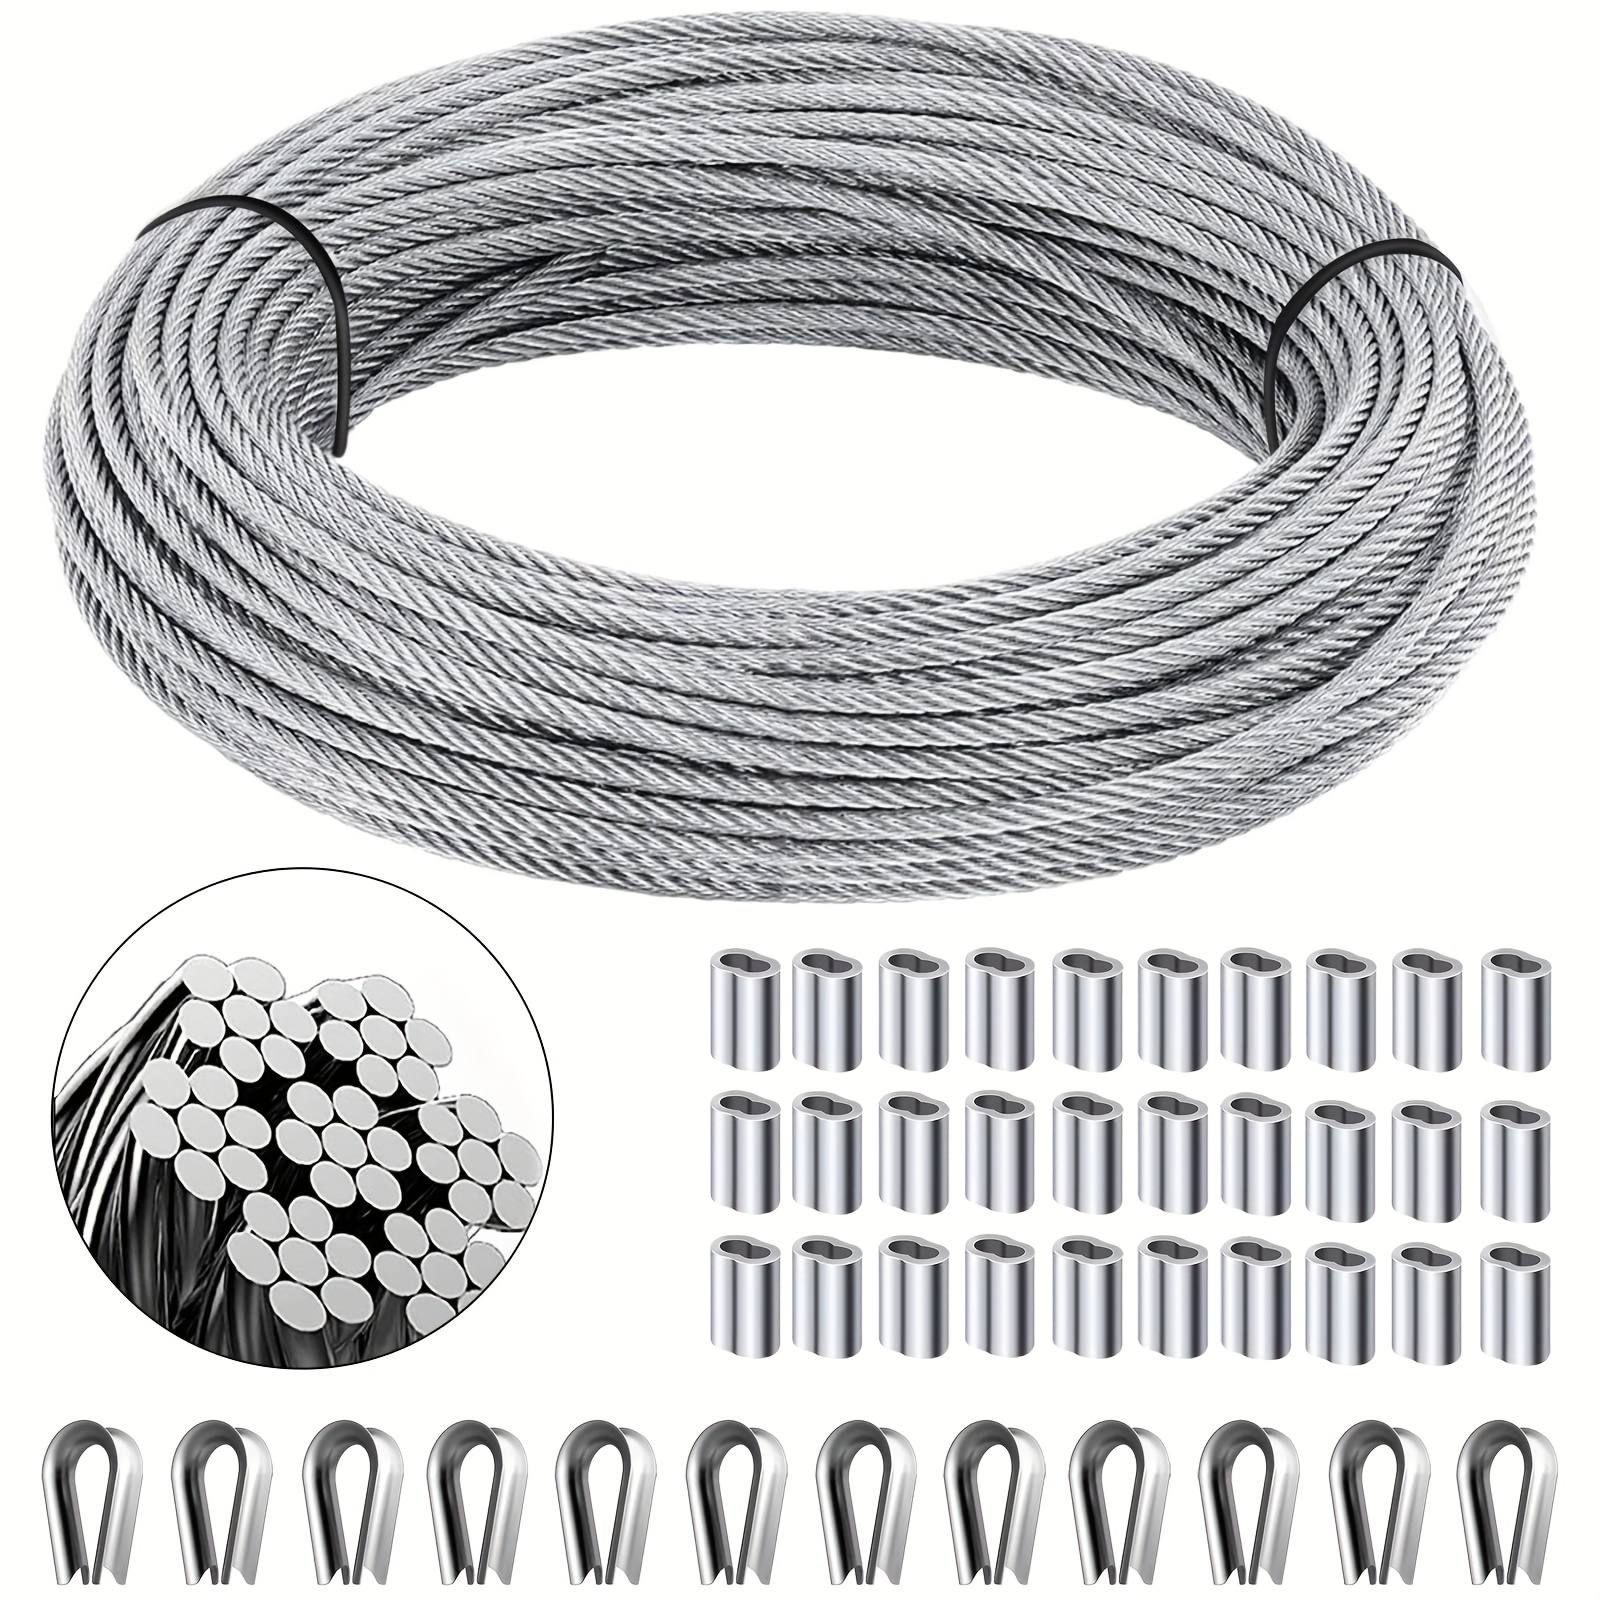 4-6 mm Wire Rope Stainless Steel Black Cable Railing Design for